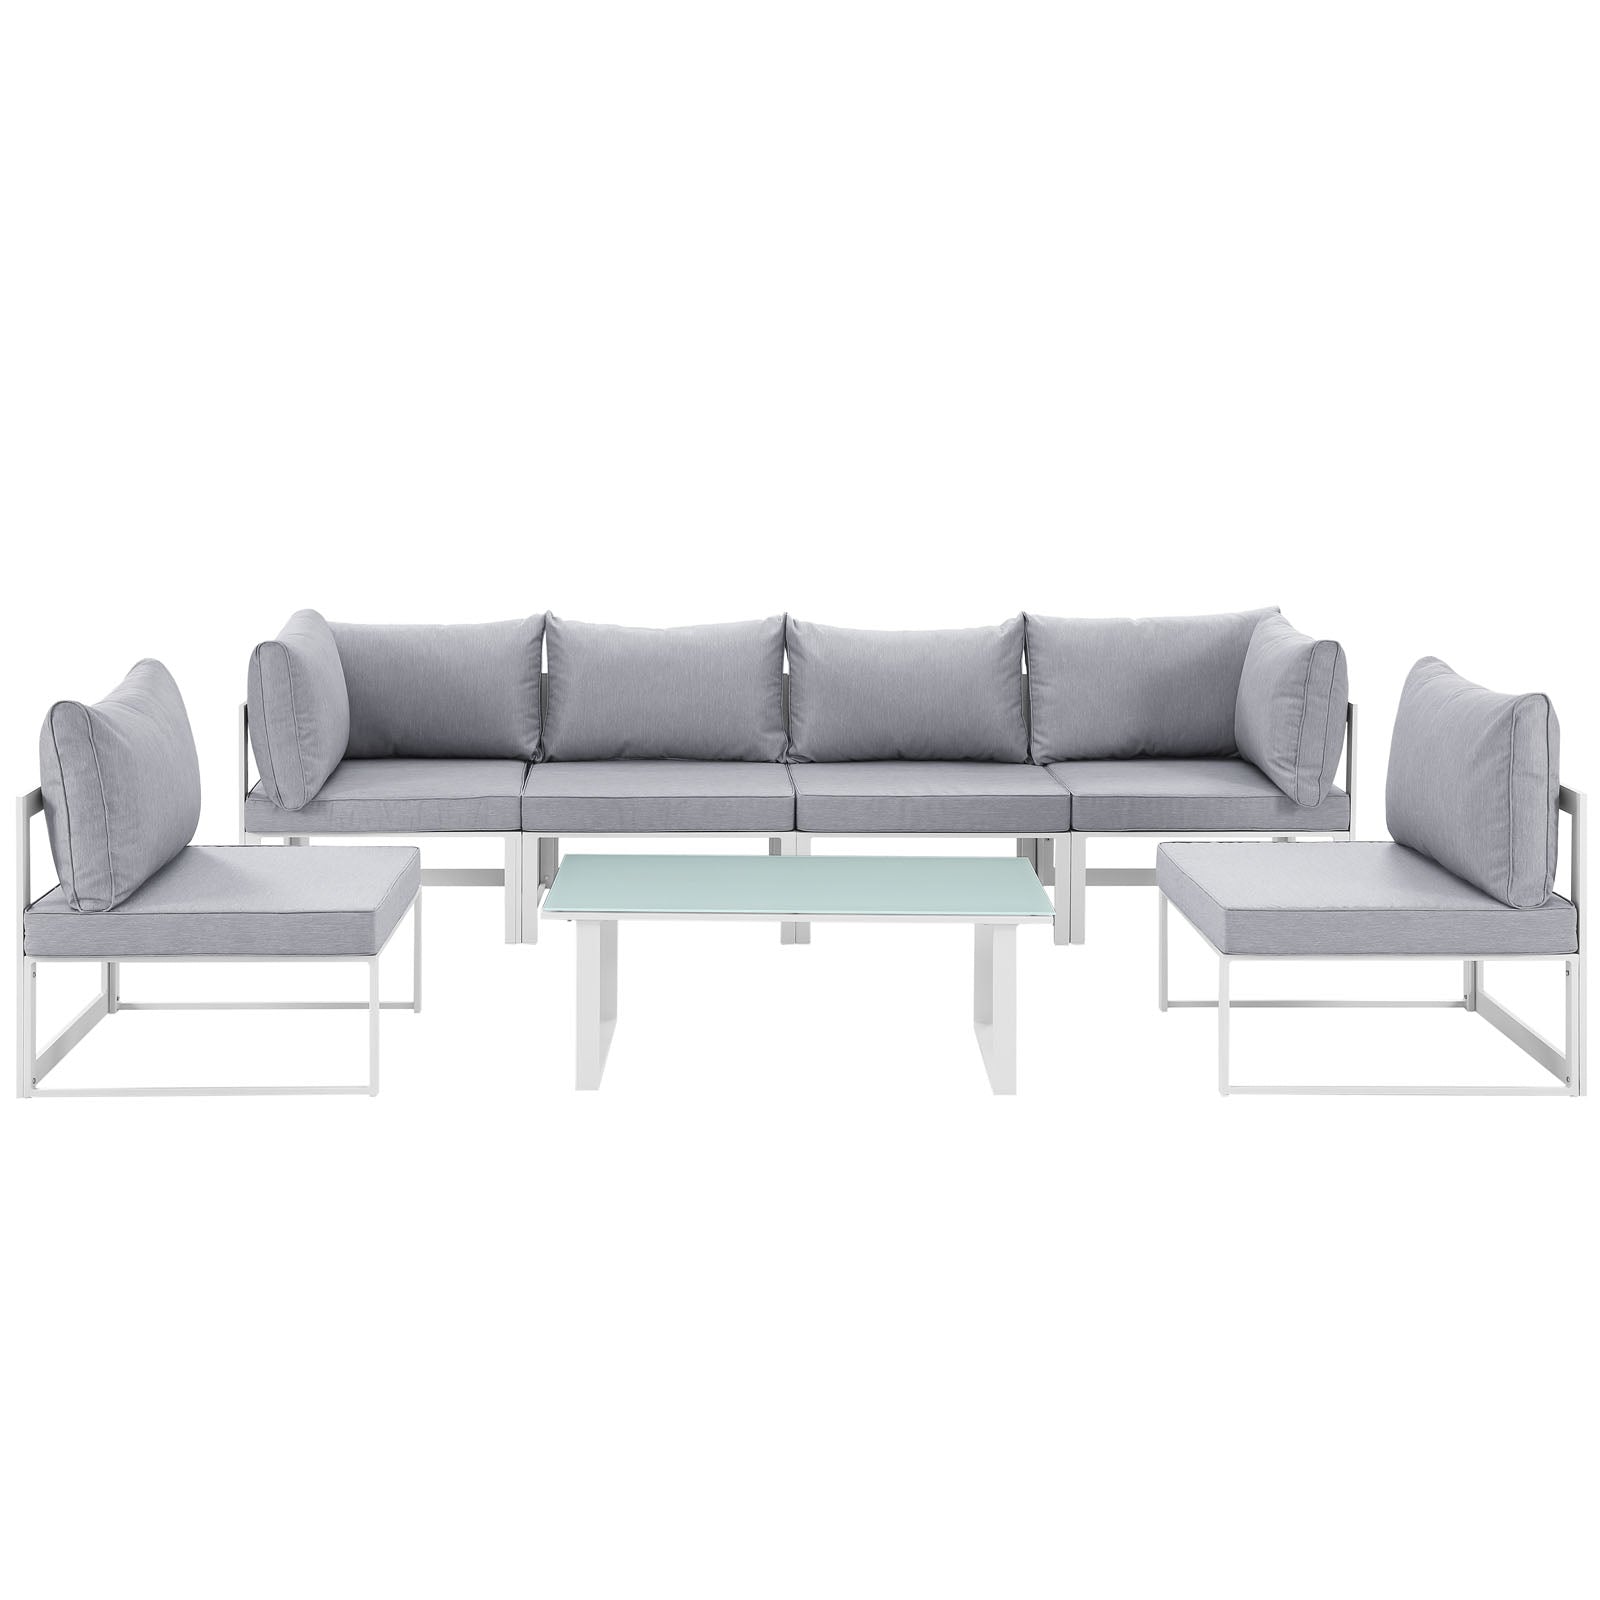 Fortuna 7 Piece Outdoor Patio Sectional Sofa Set-Outdoor Set-Modway-Wall2Wall Furnishings